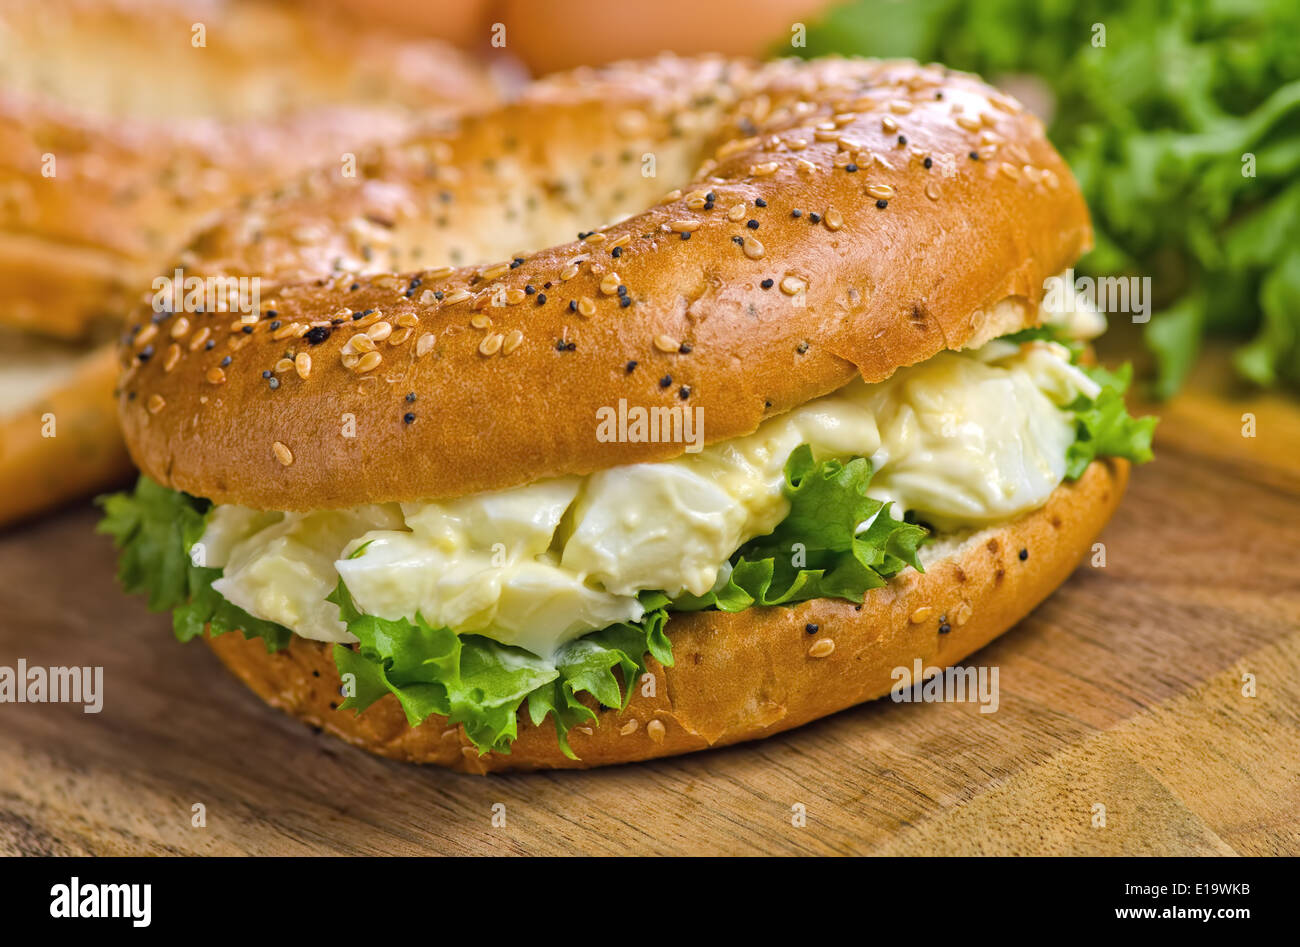 A toasted everything bagel with egg salad and lettuce. Stock Photo